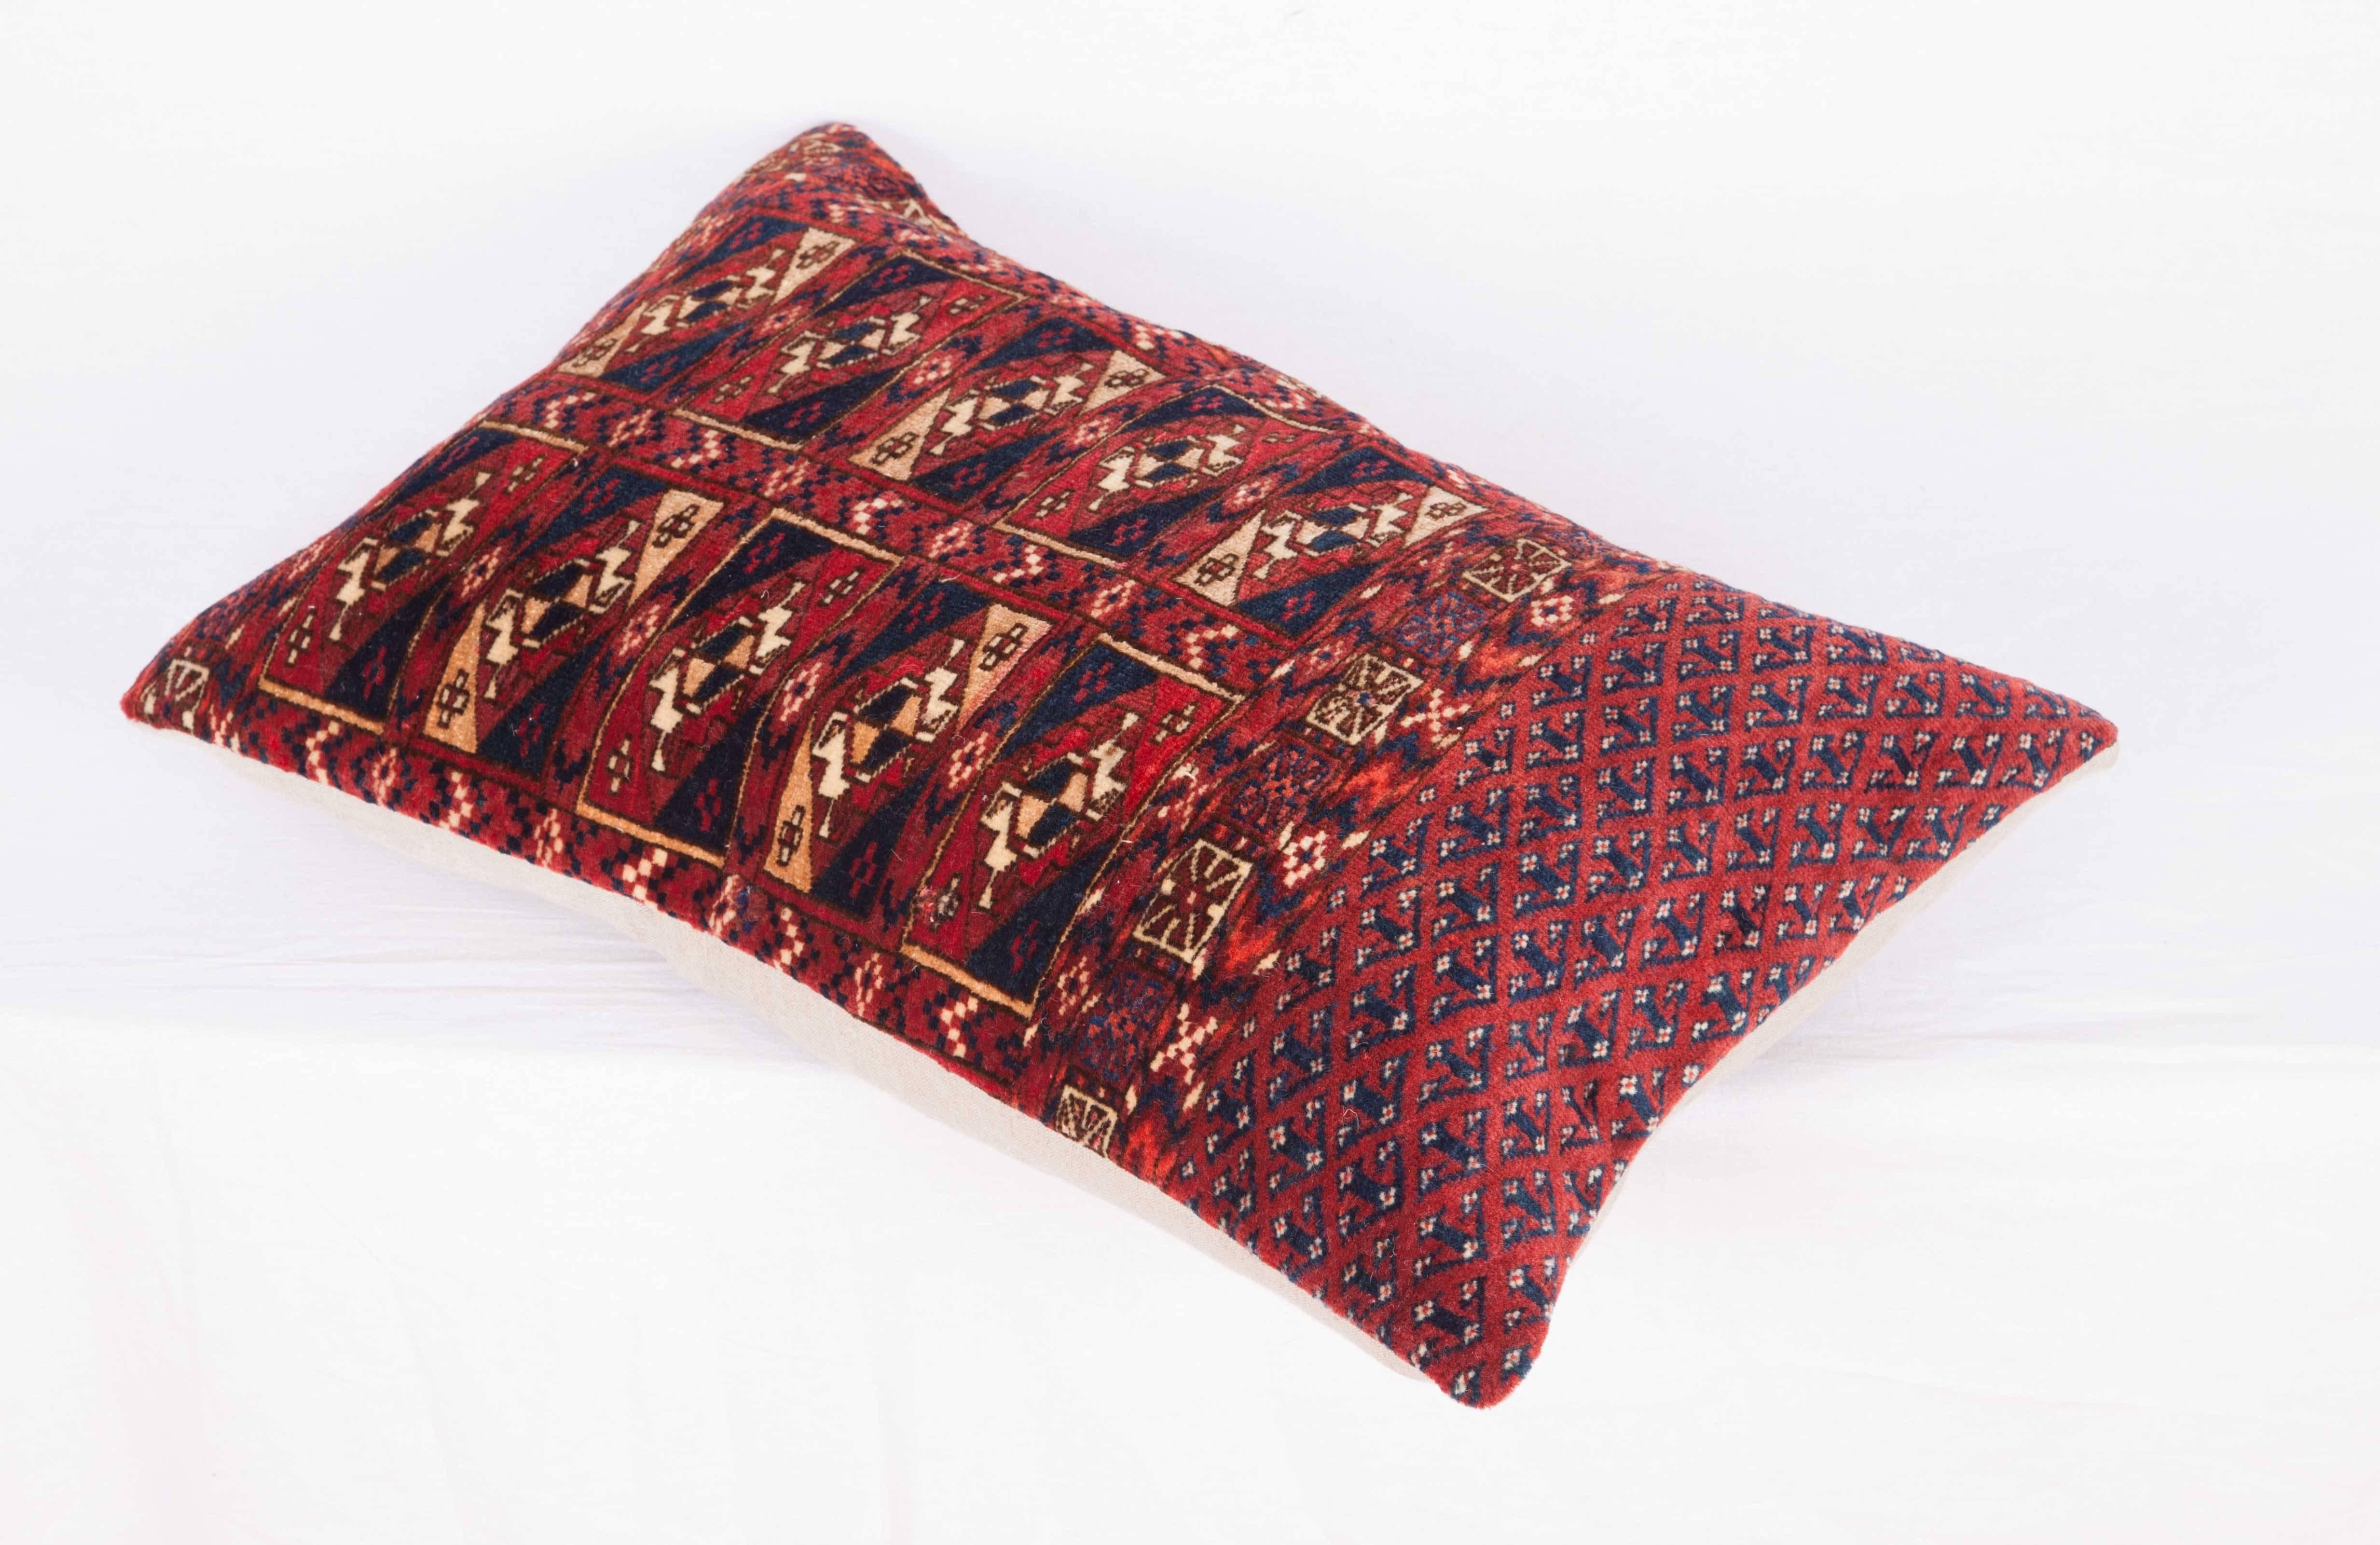 Wool Antique Pillow with Velvet like Texture Made Out of a Turkmen Bag For Sale